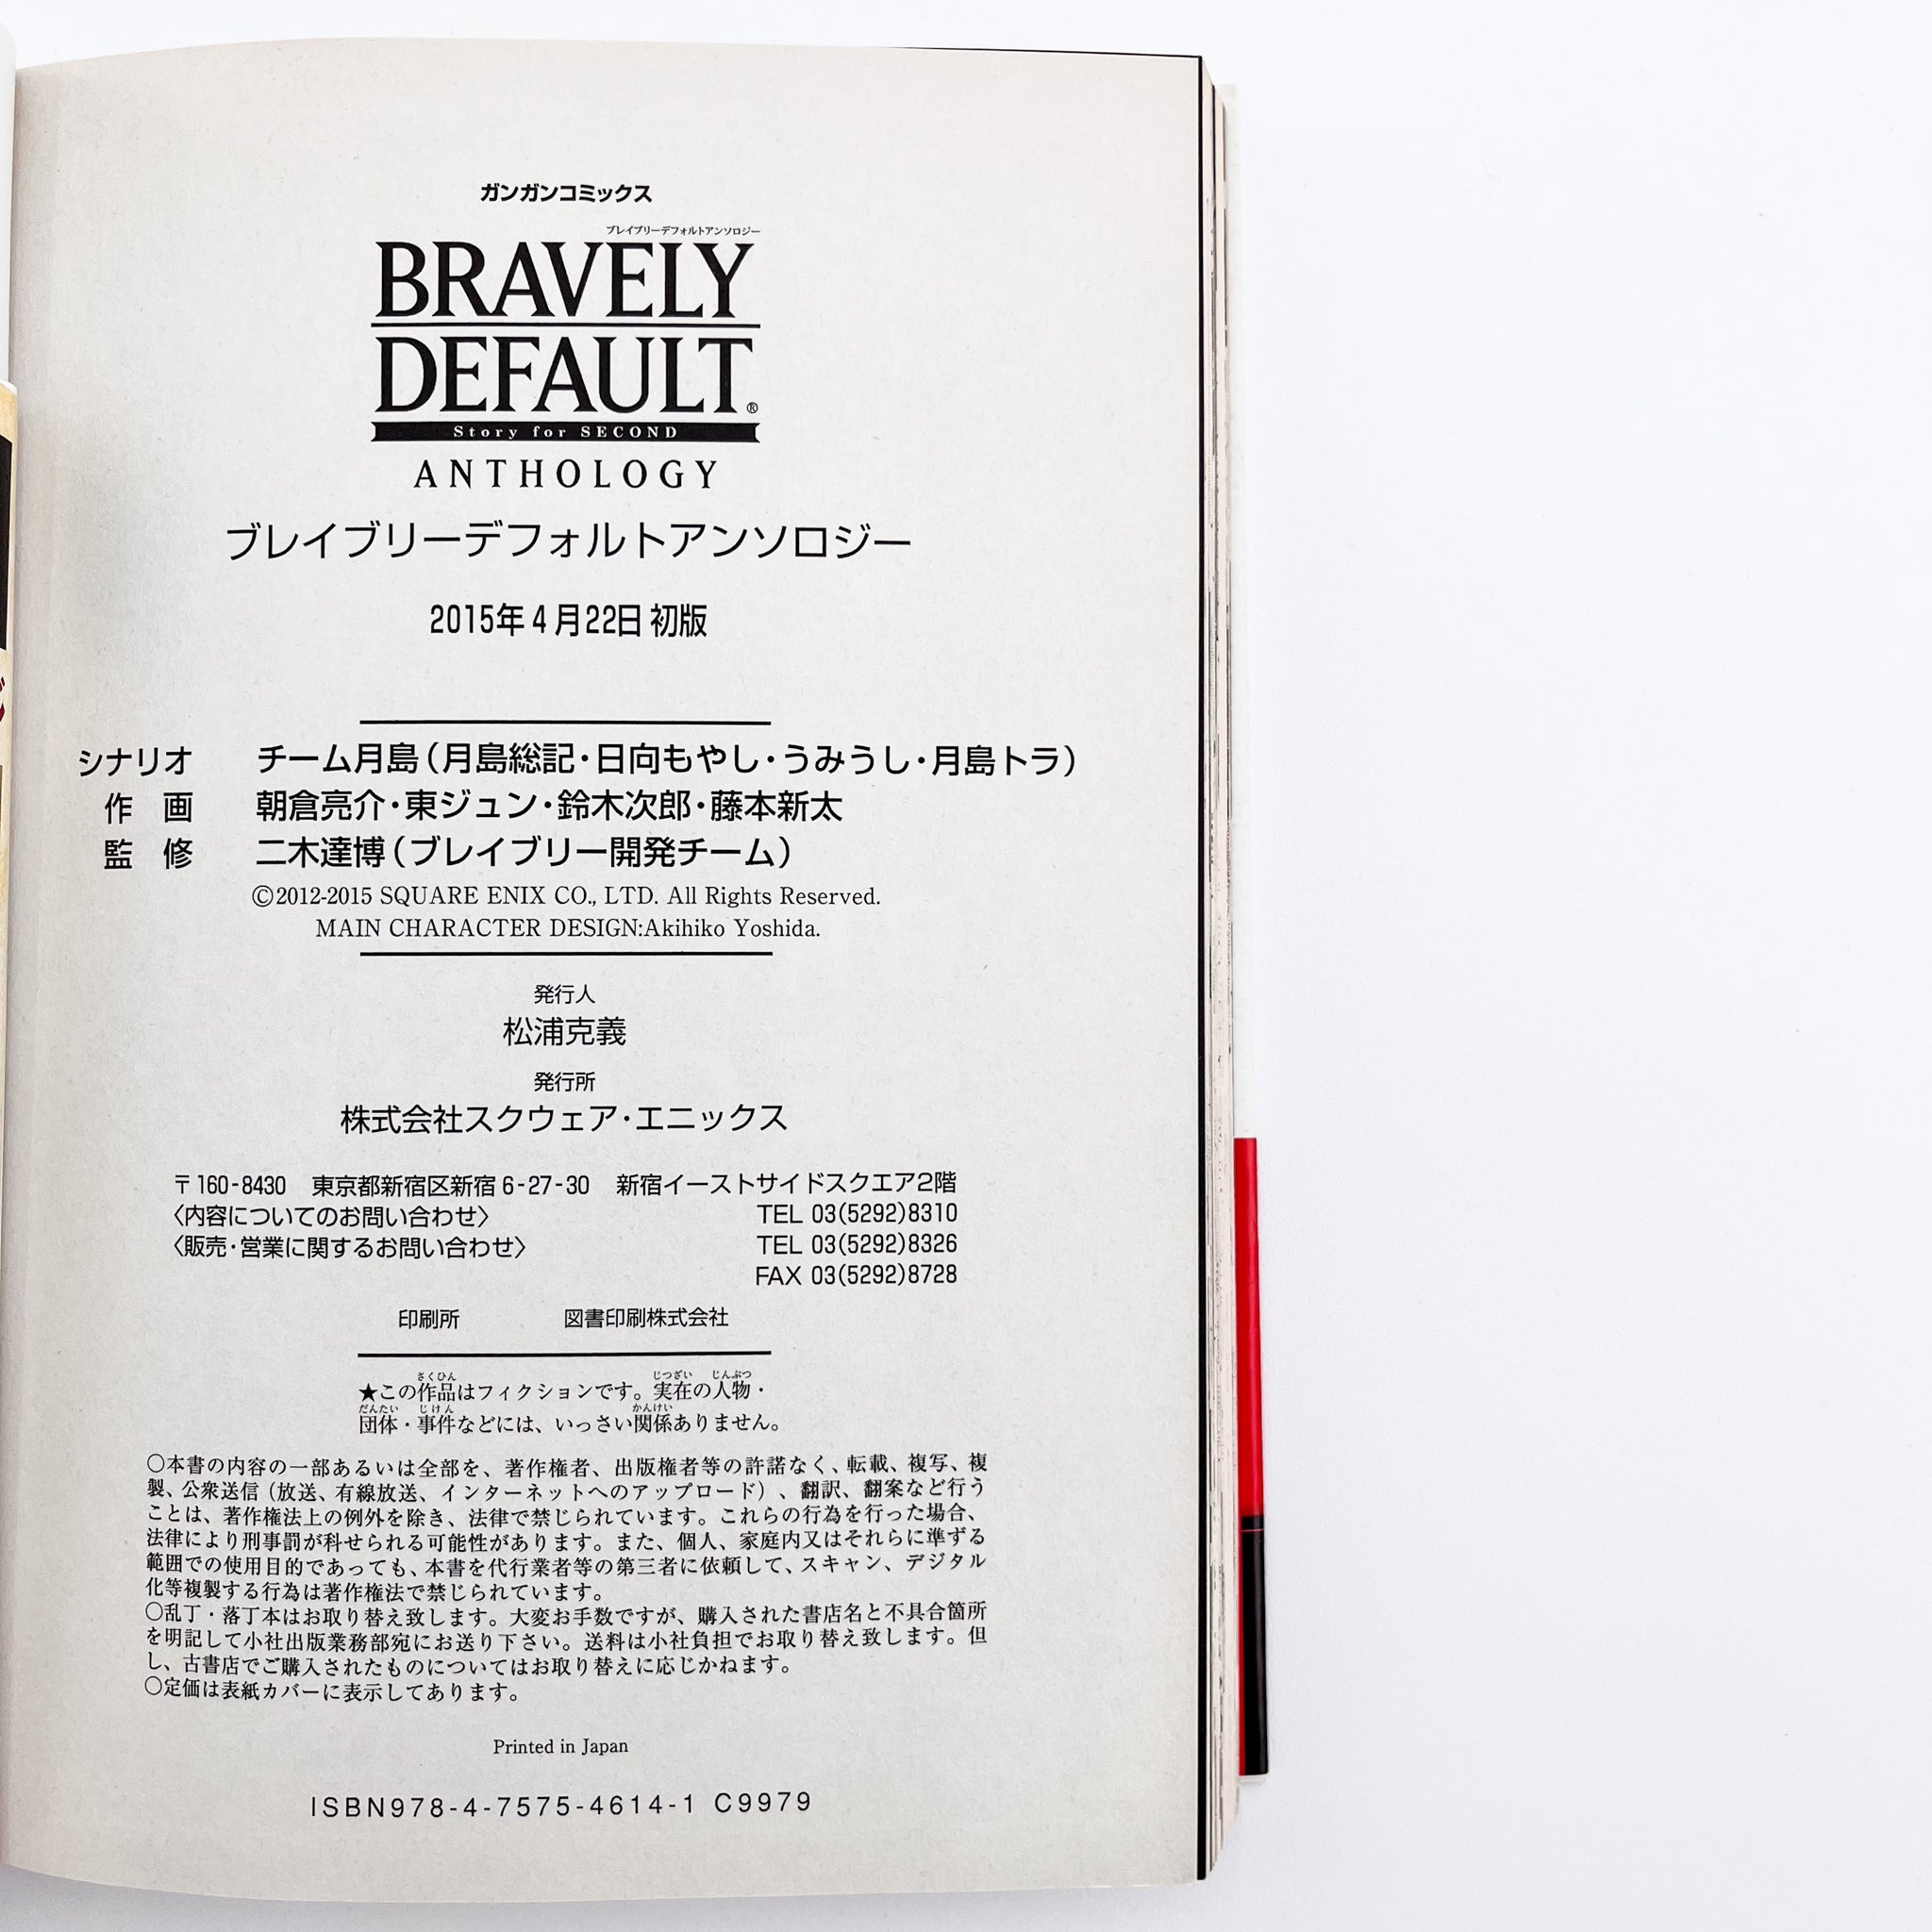 Bravely Default Story for the Sequel Anthology information page